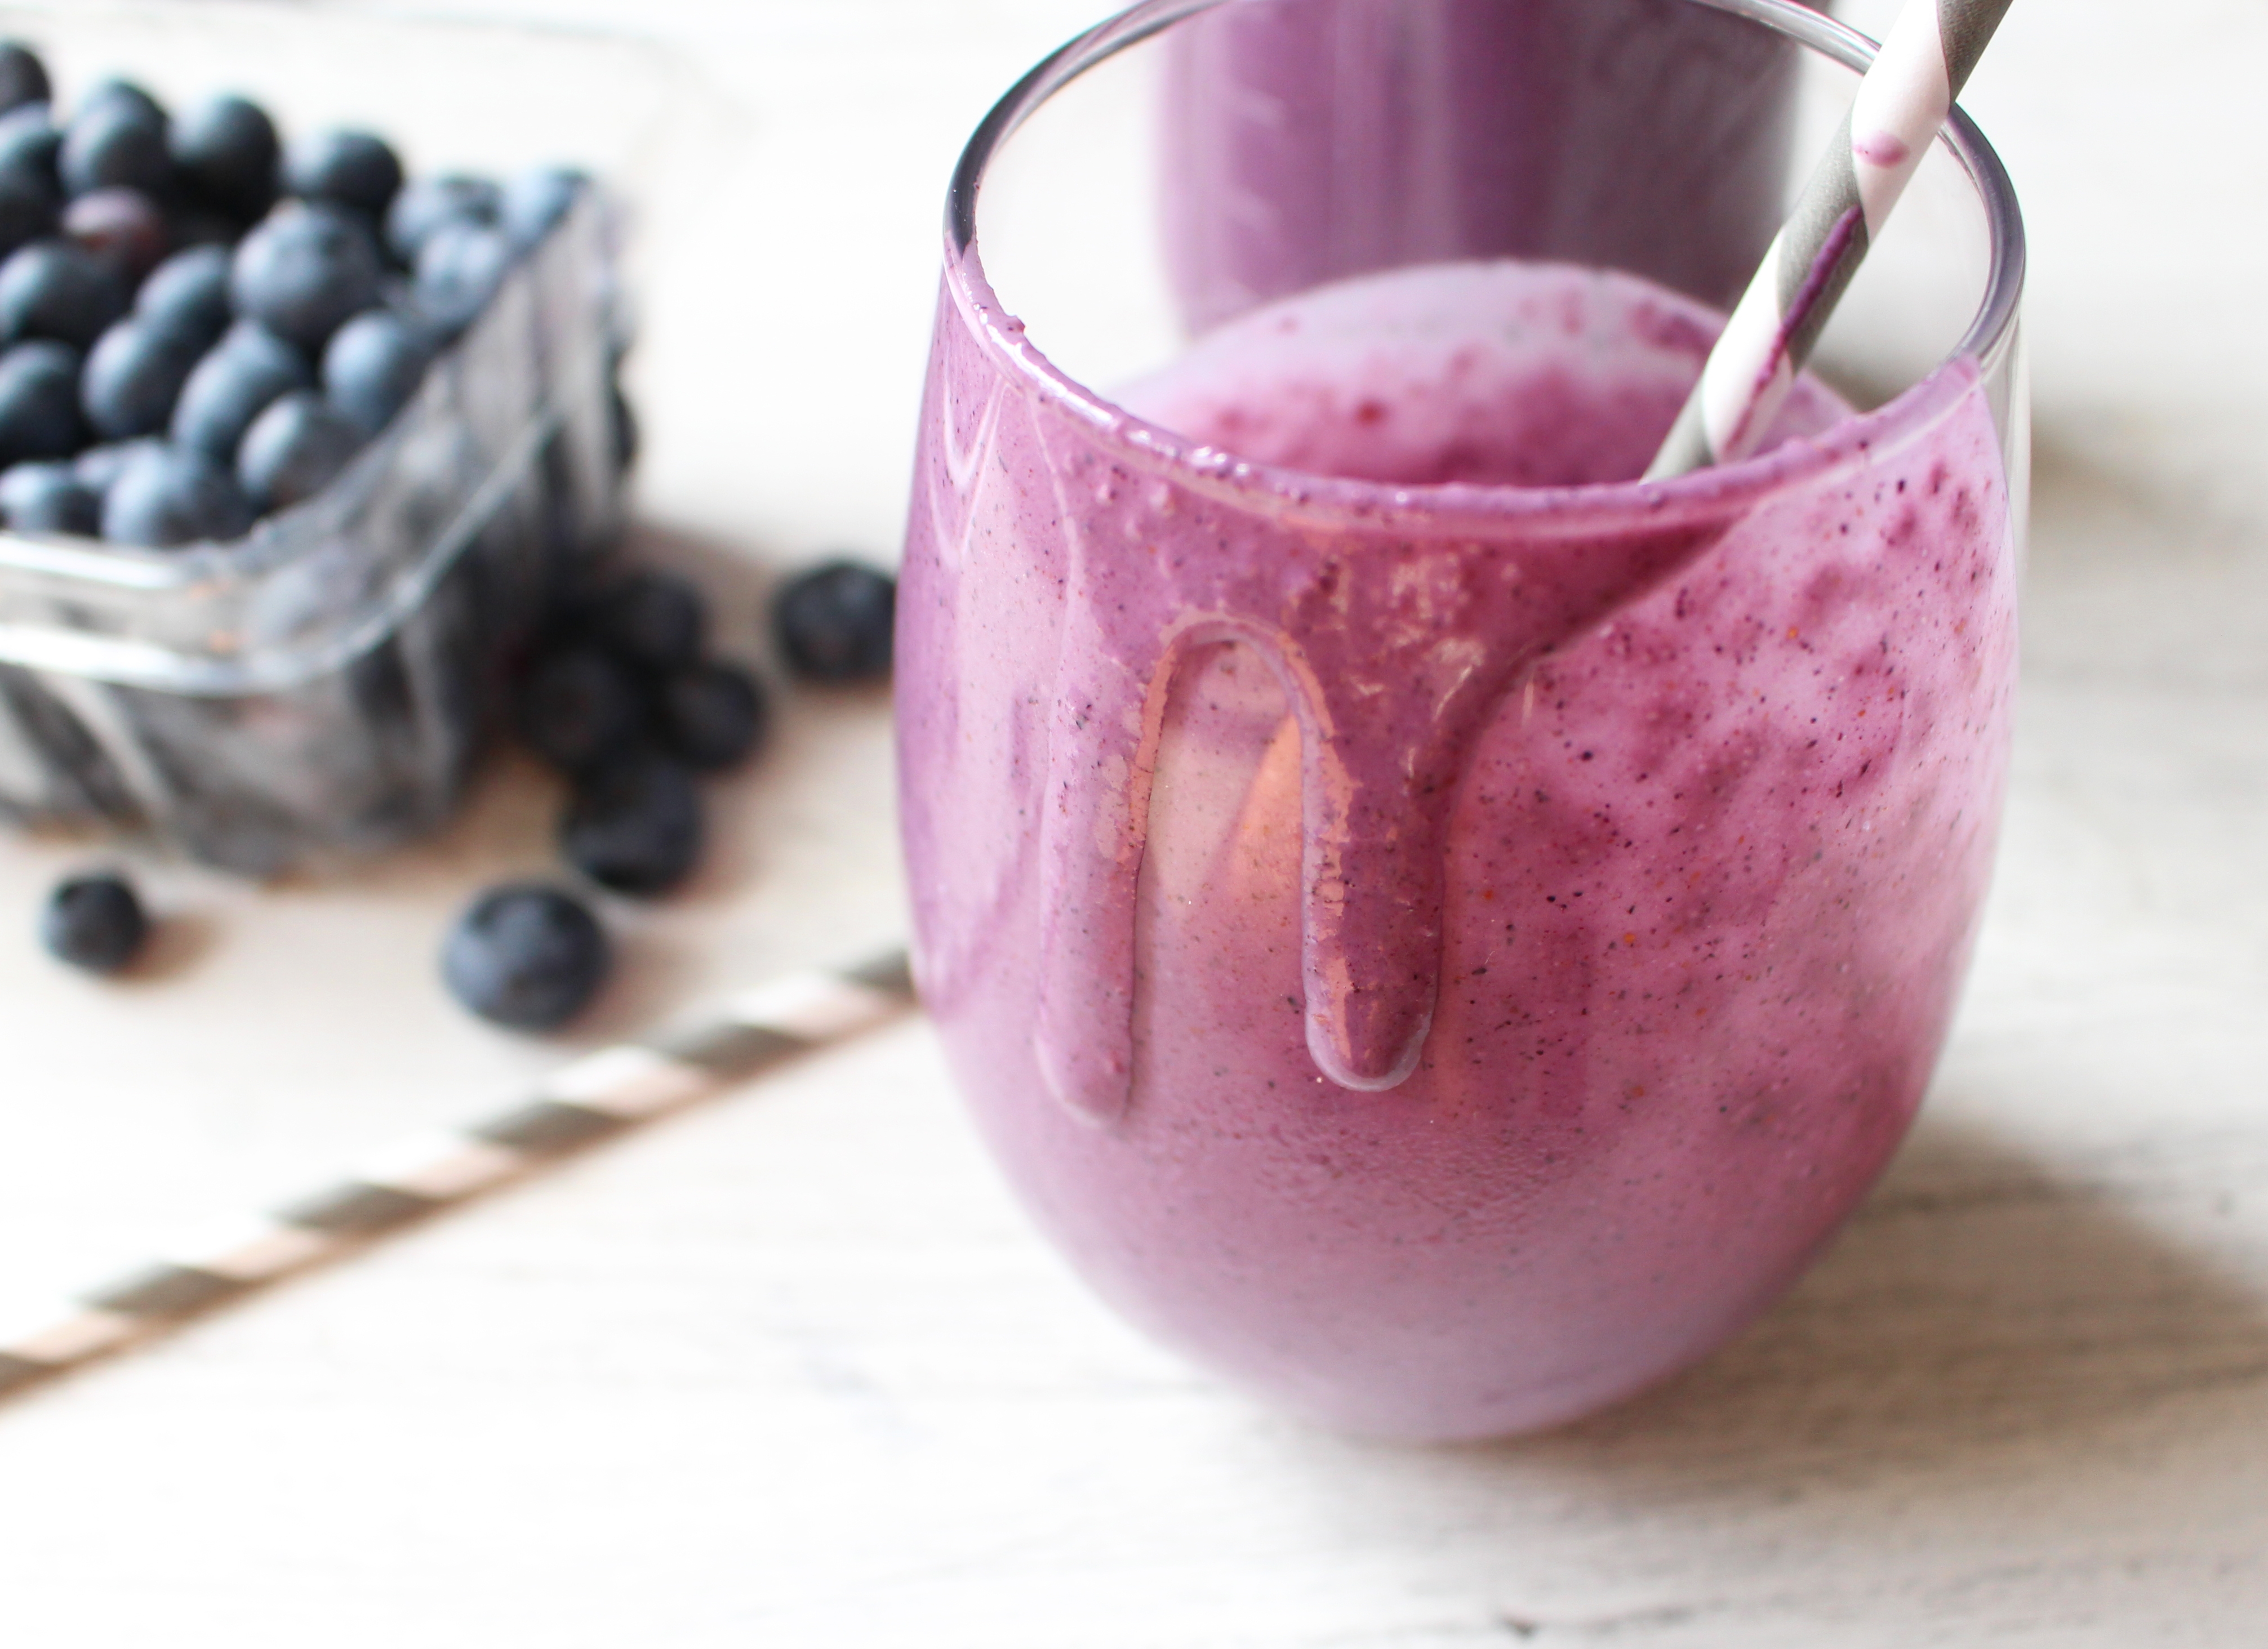 Blueberry oat smoothie - like a blueberry crumble packed into a smoothie!